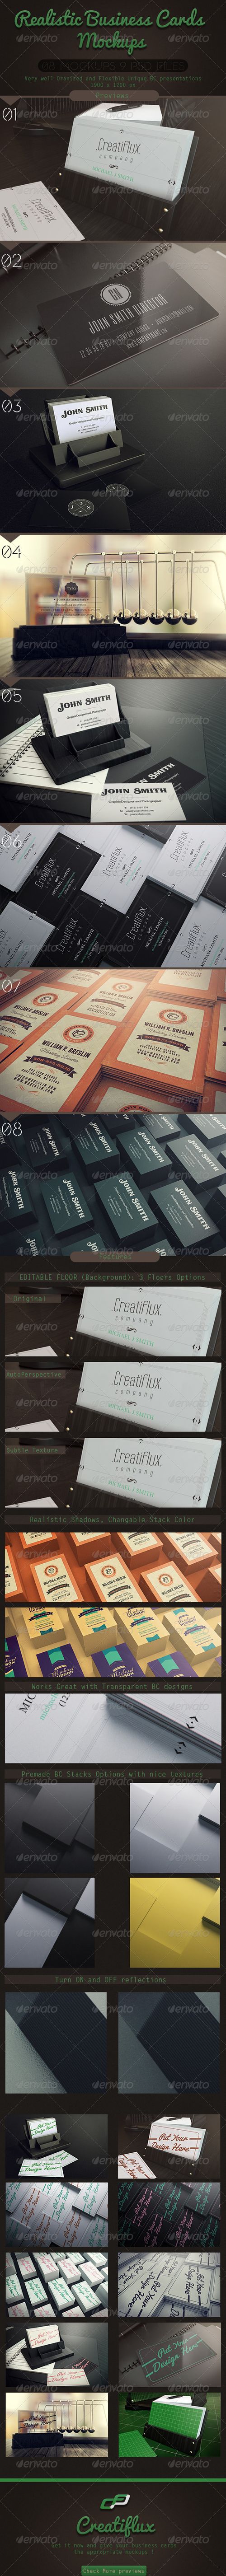 PSD - Realistic Business Cards Mockups 5625344